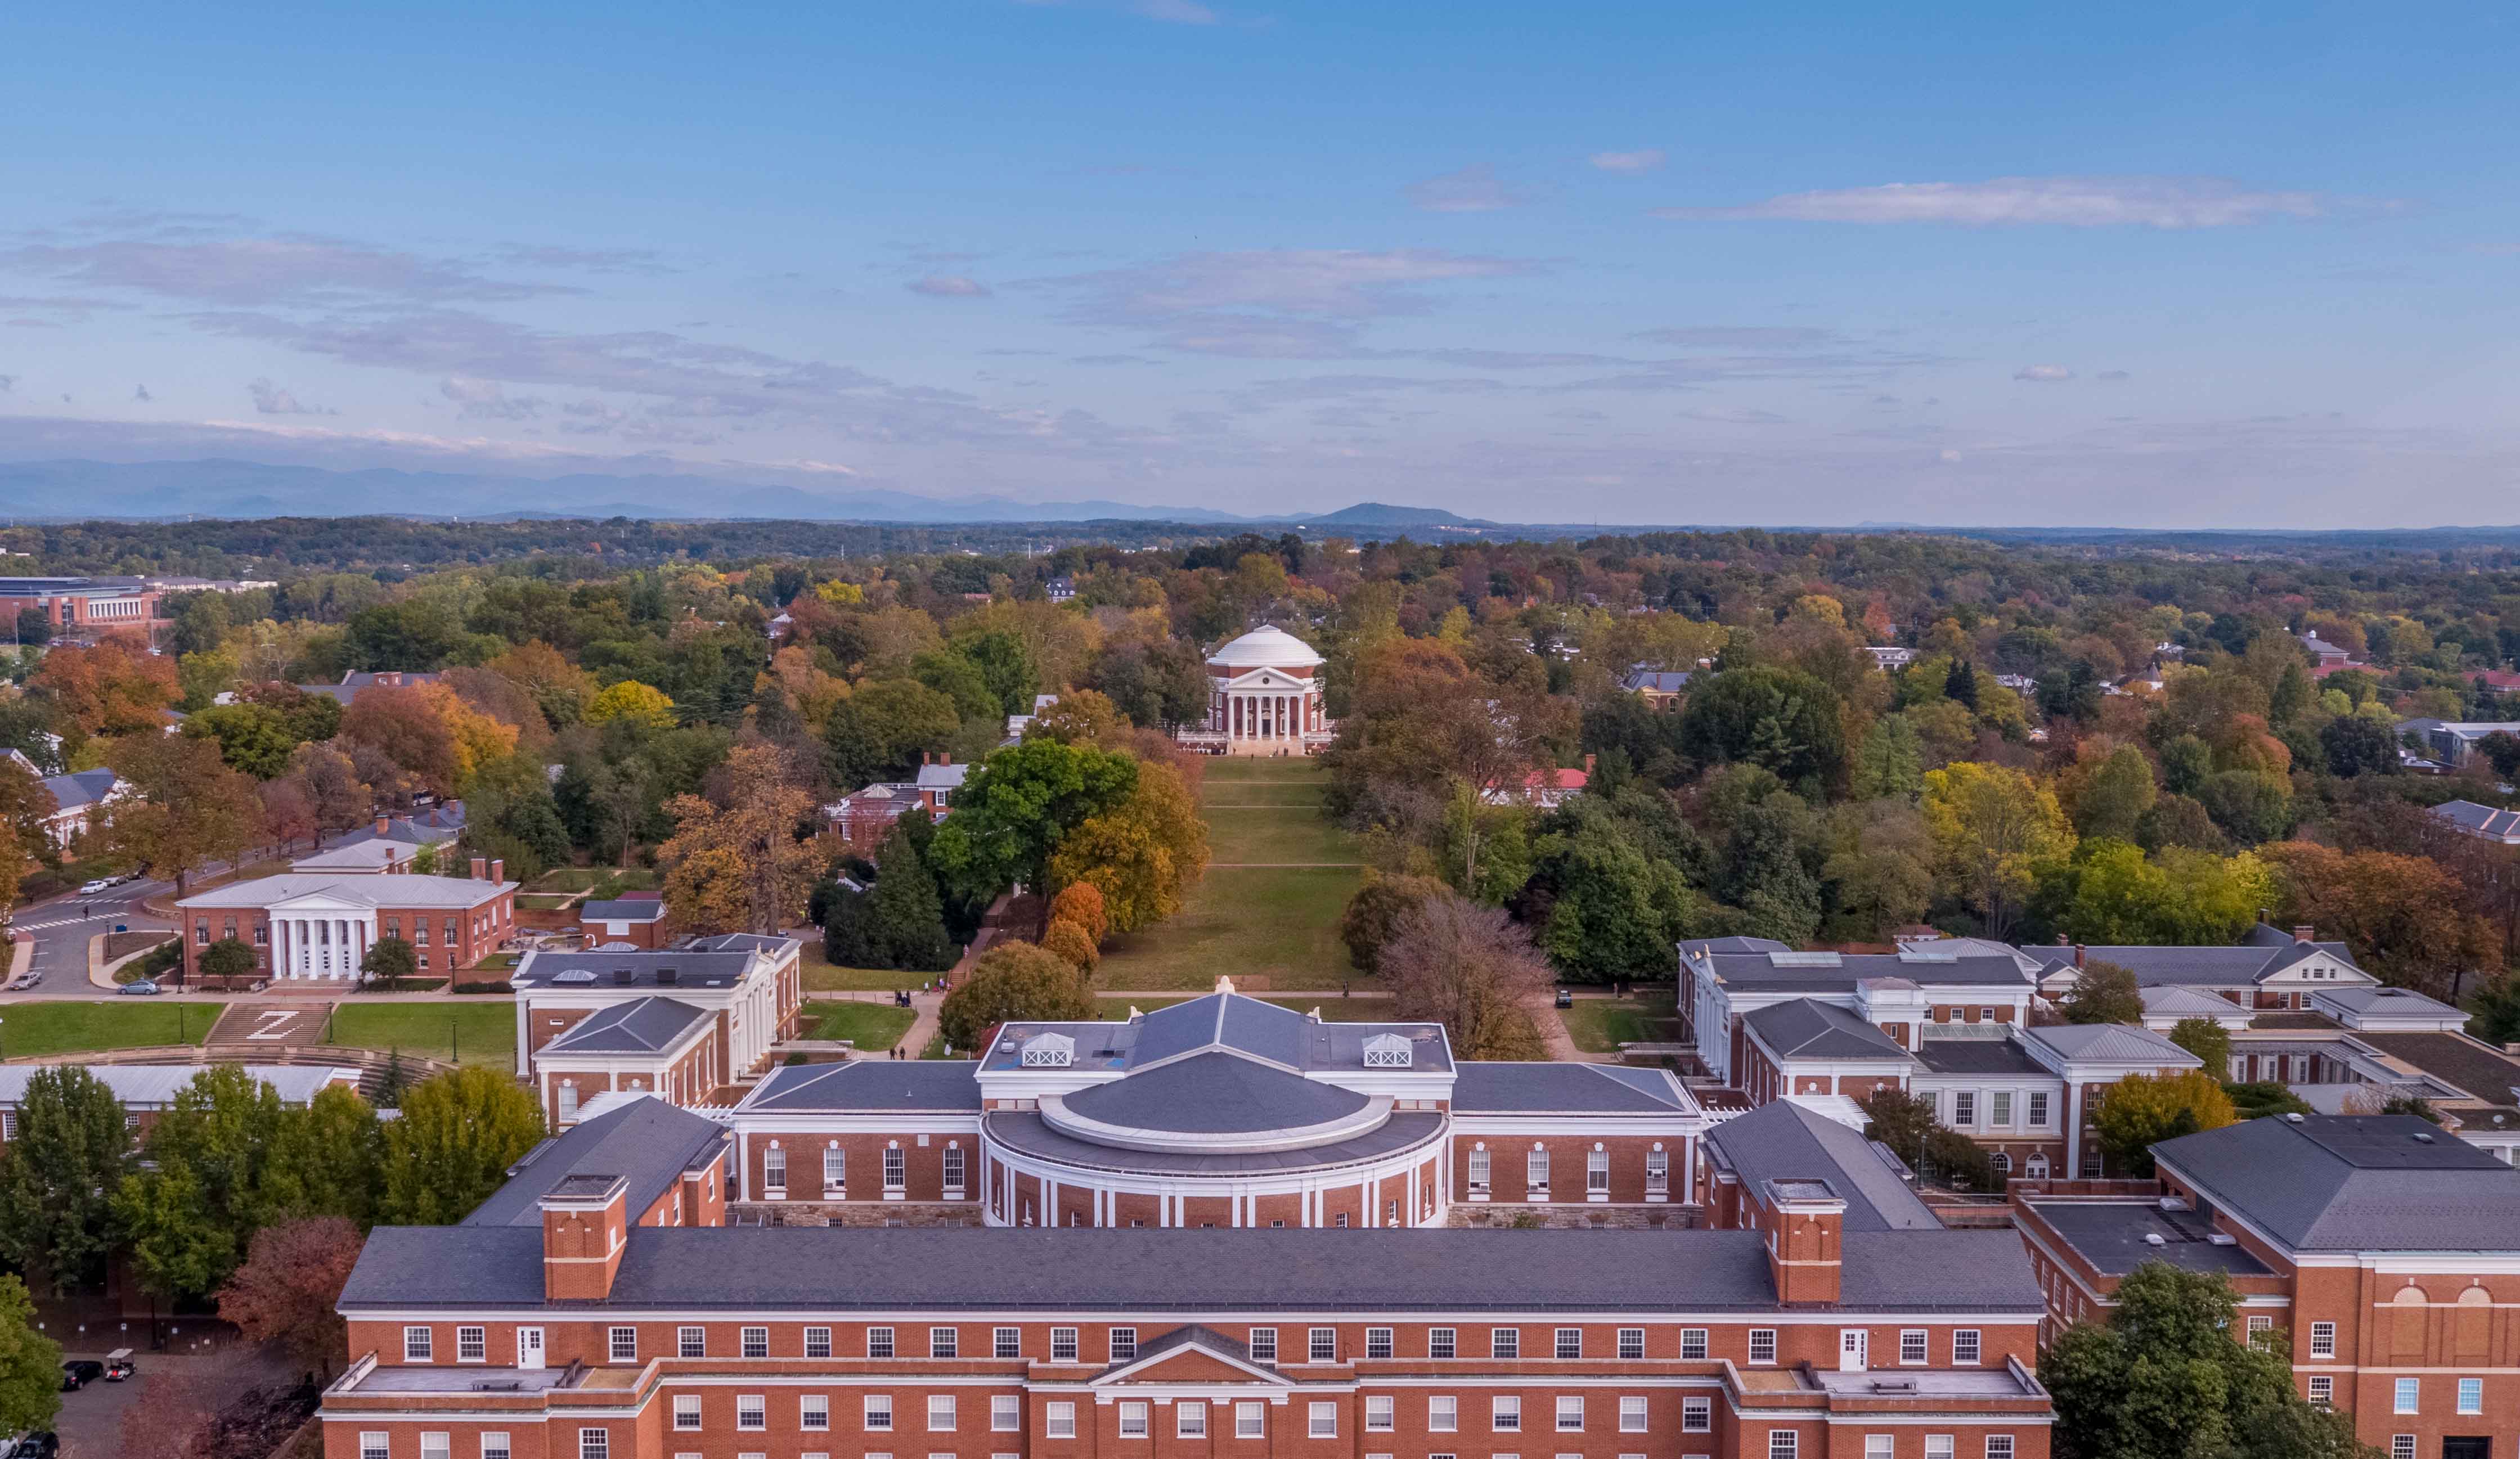 View over Cabell and the Lawn